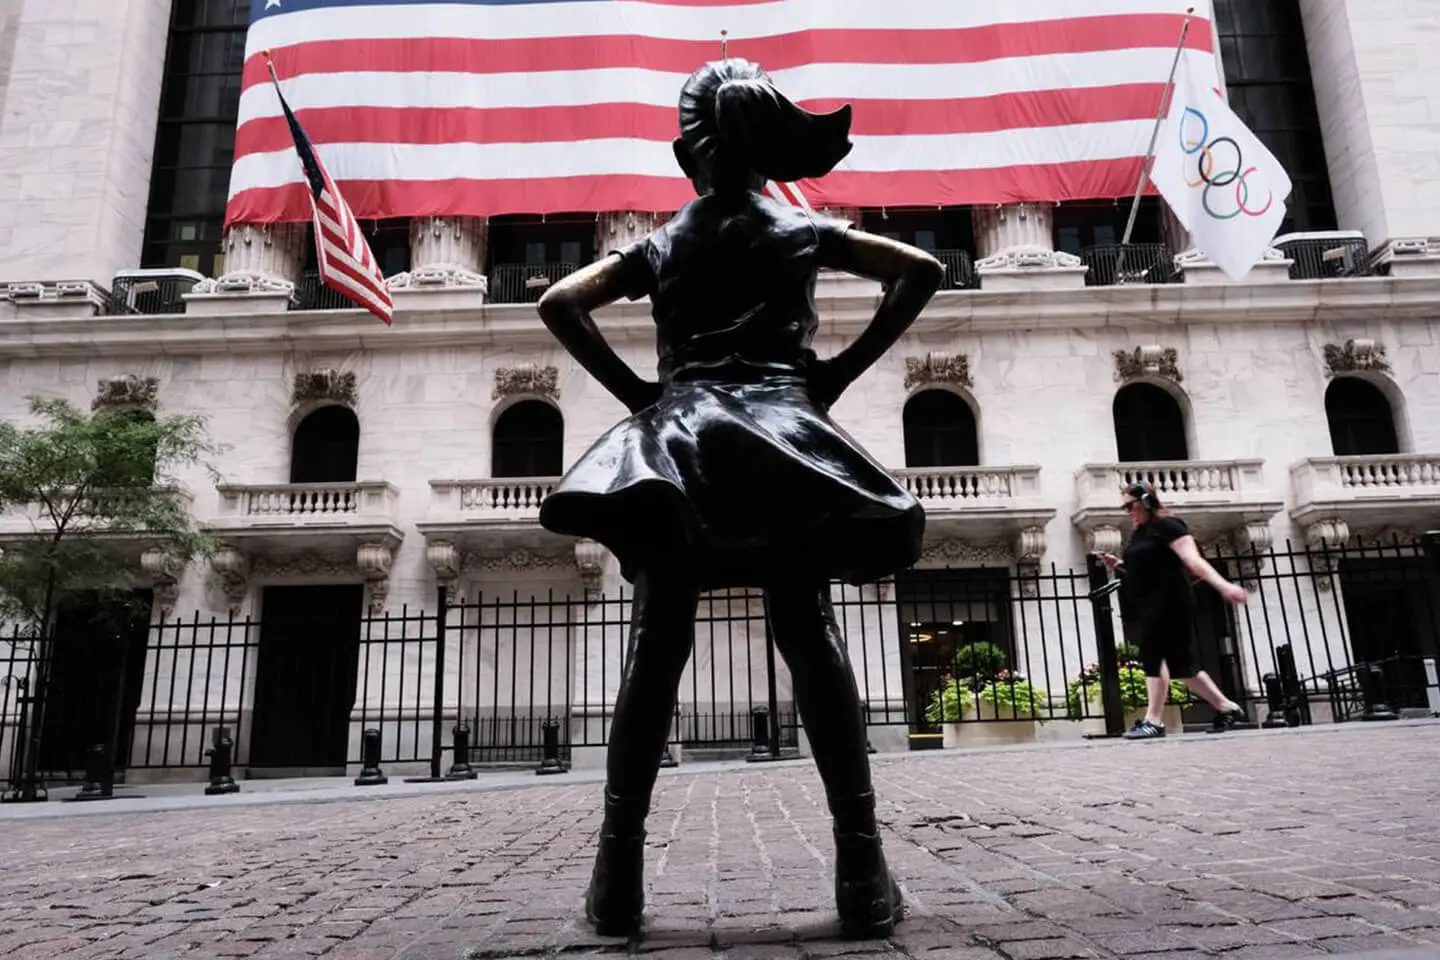 A statue of a girl with hands on hips standing in front of the New York Stock Exchange in Manhattan, under a large American flag.